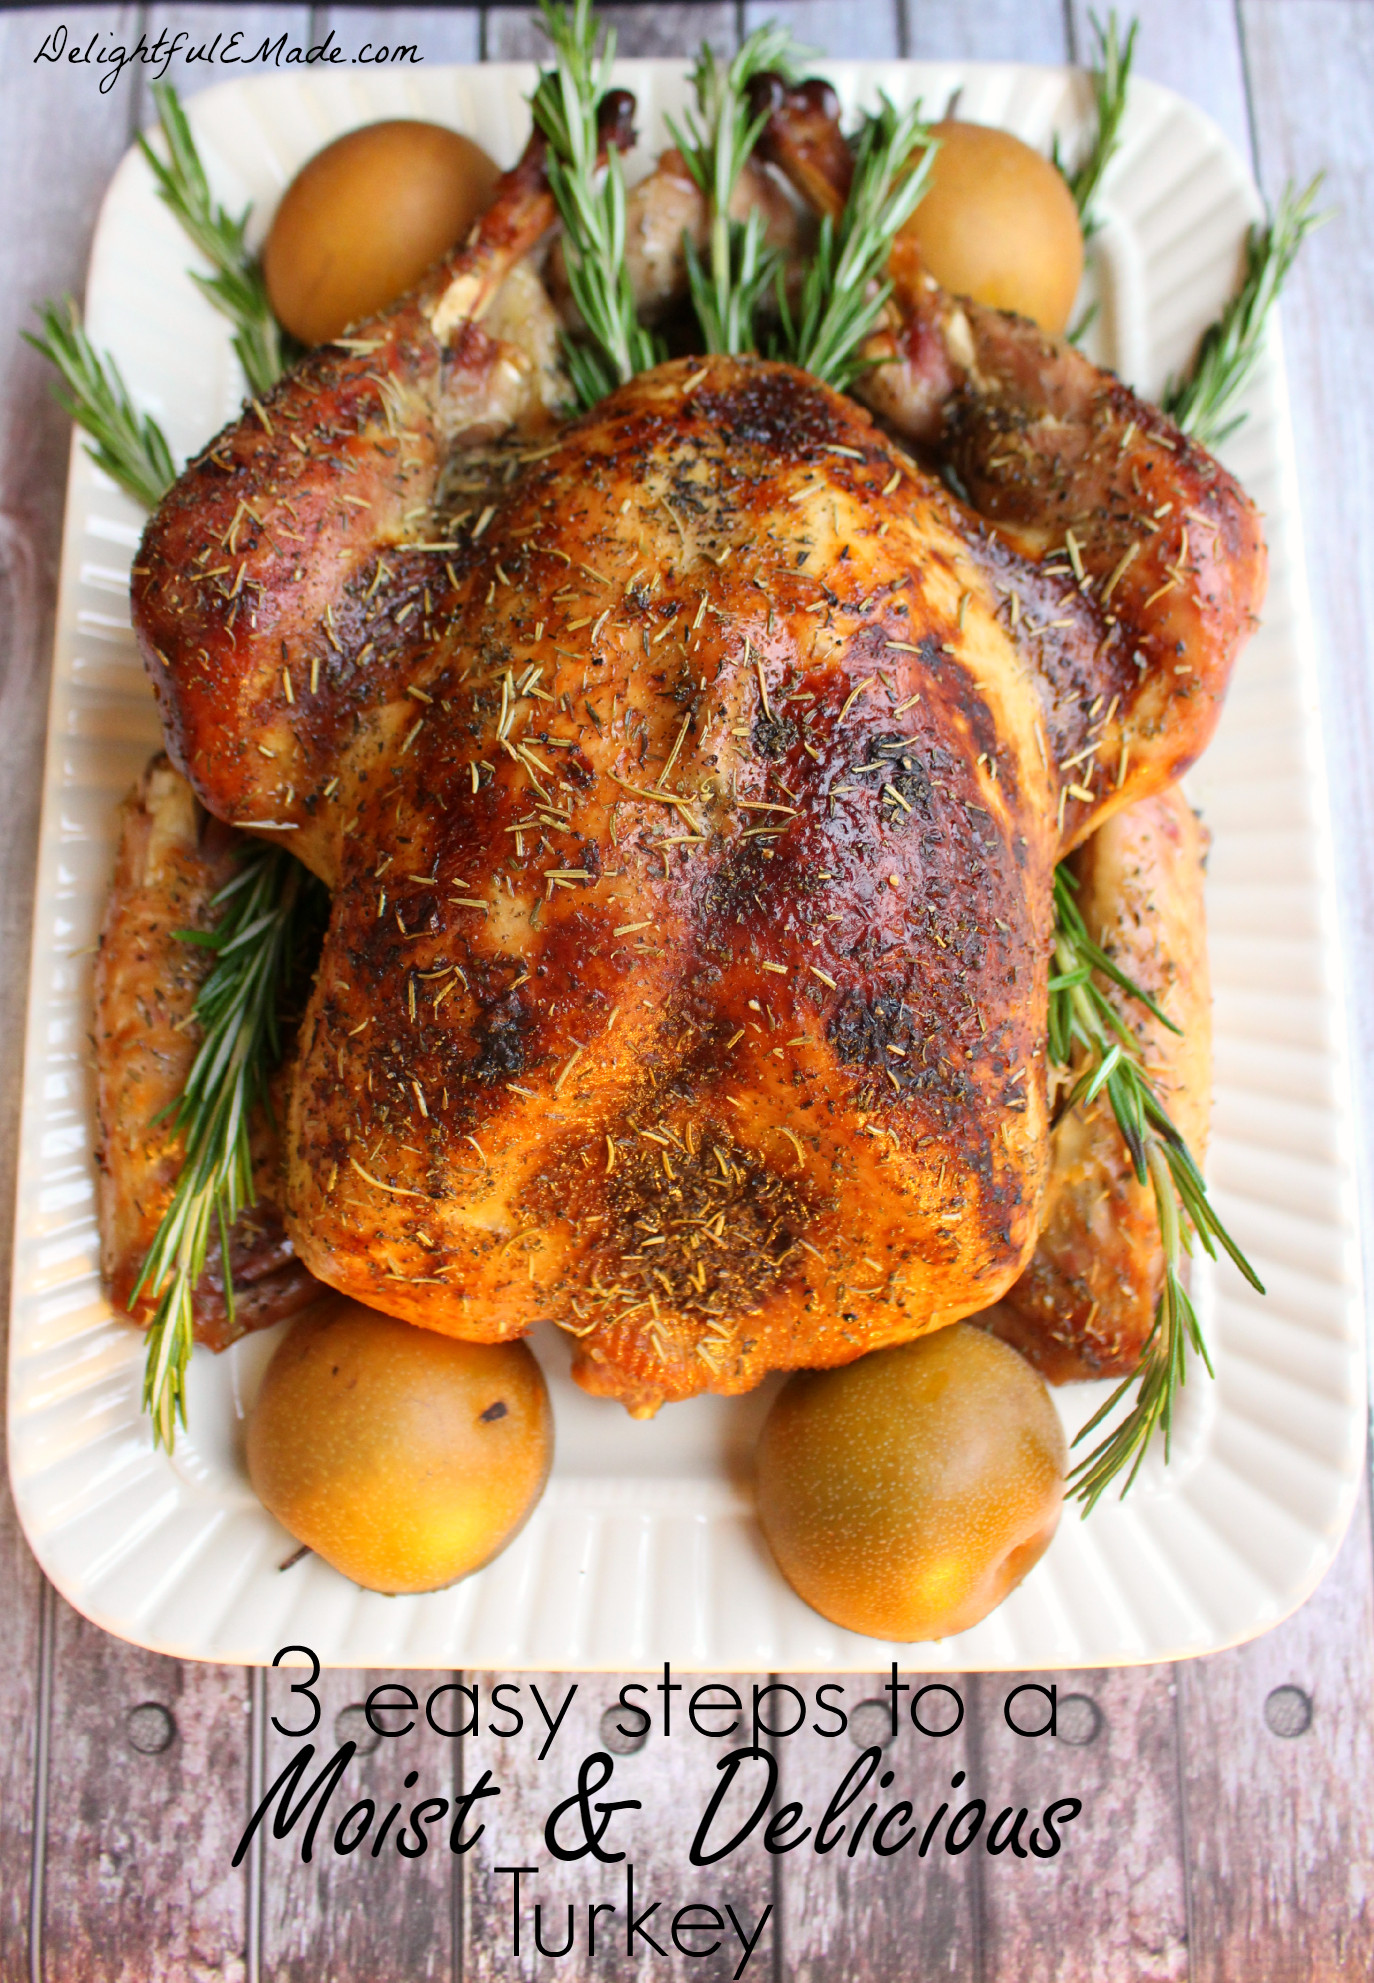 Easy Thanksgiving Turkey
 3 Easy Steps to a Moist and Delicious Turkey Delightful